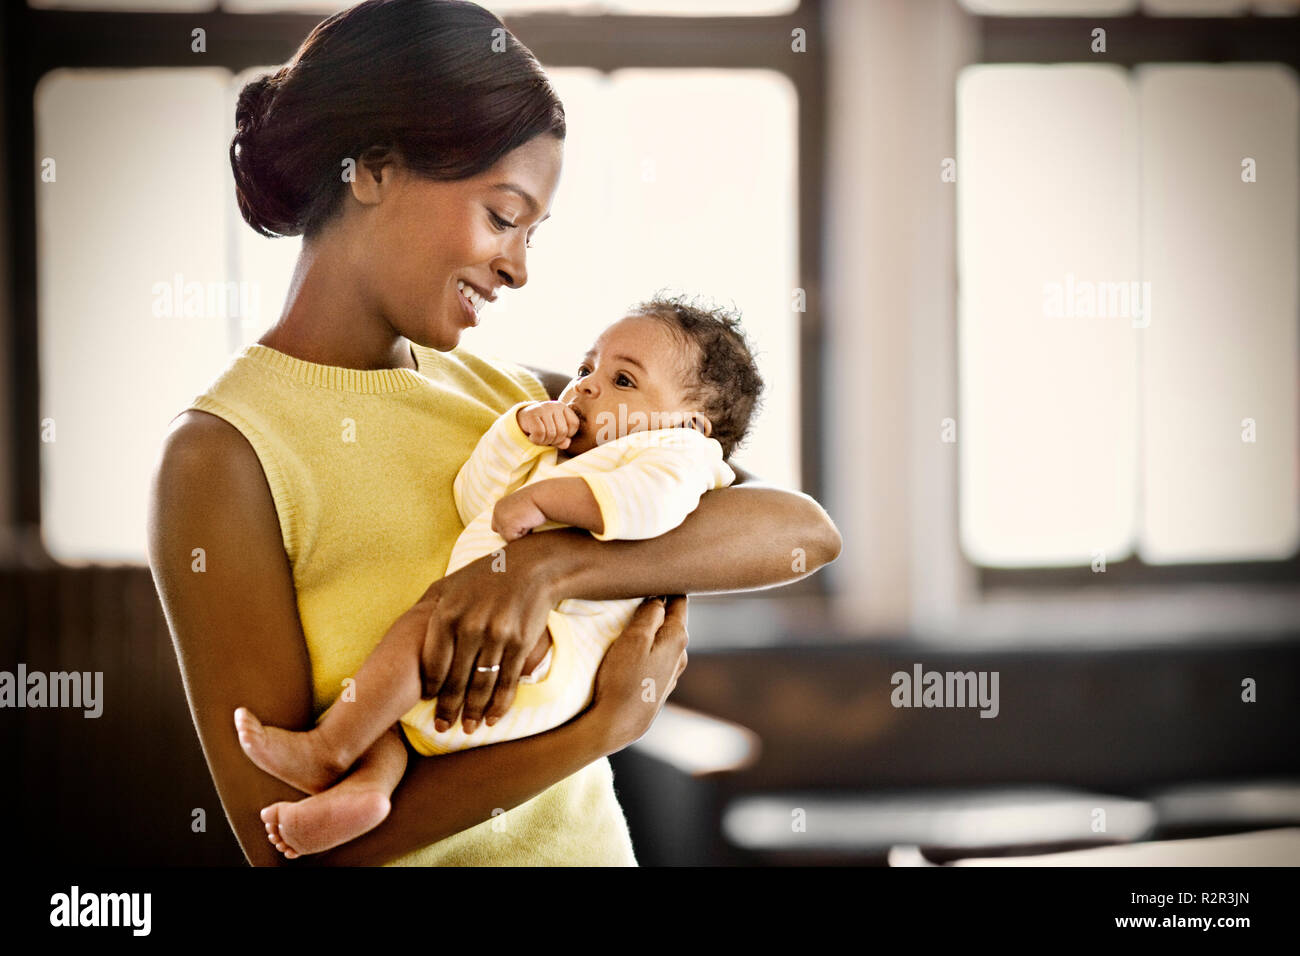 Smiling young mother holding her baby. Stock Photo